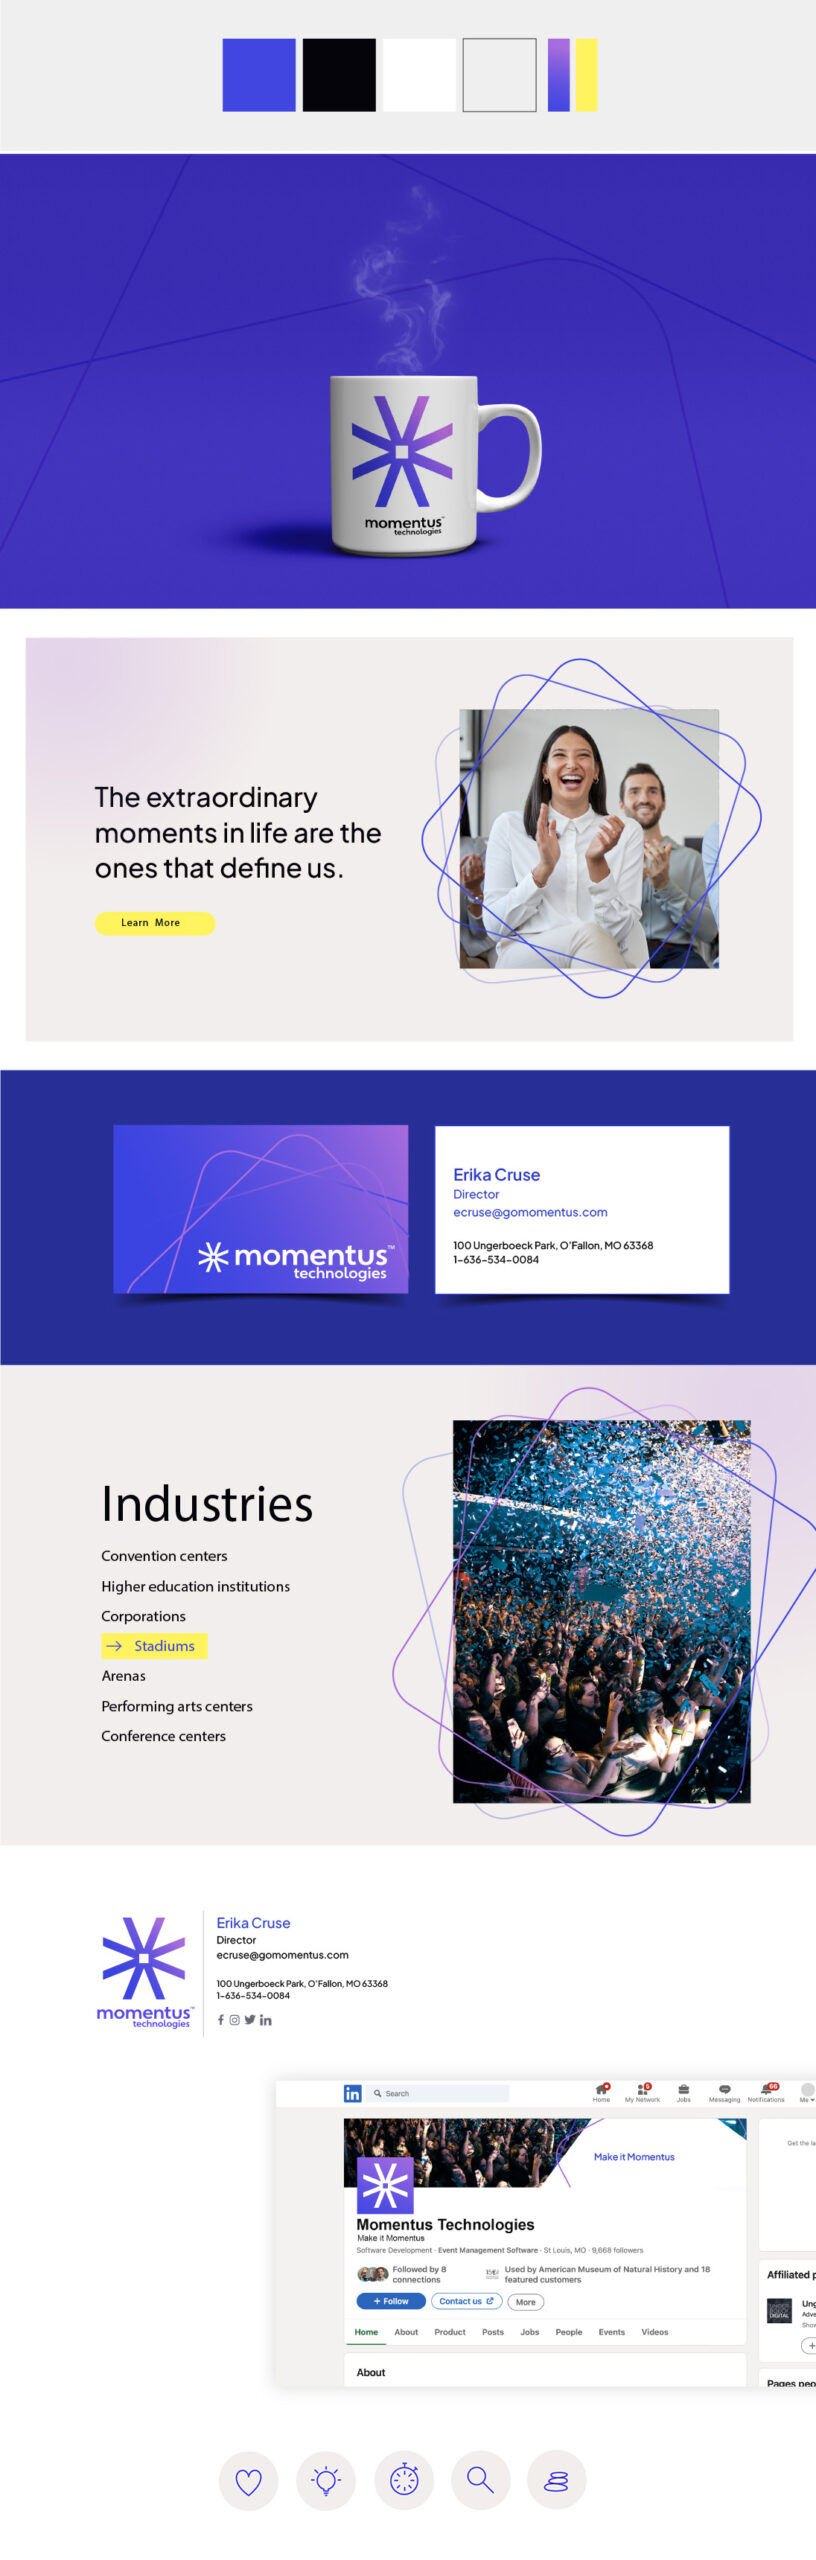 Our moldboard we created to show the elements of the Momentus brand touchpoints coming together.